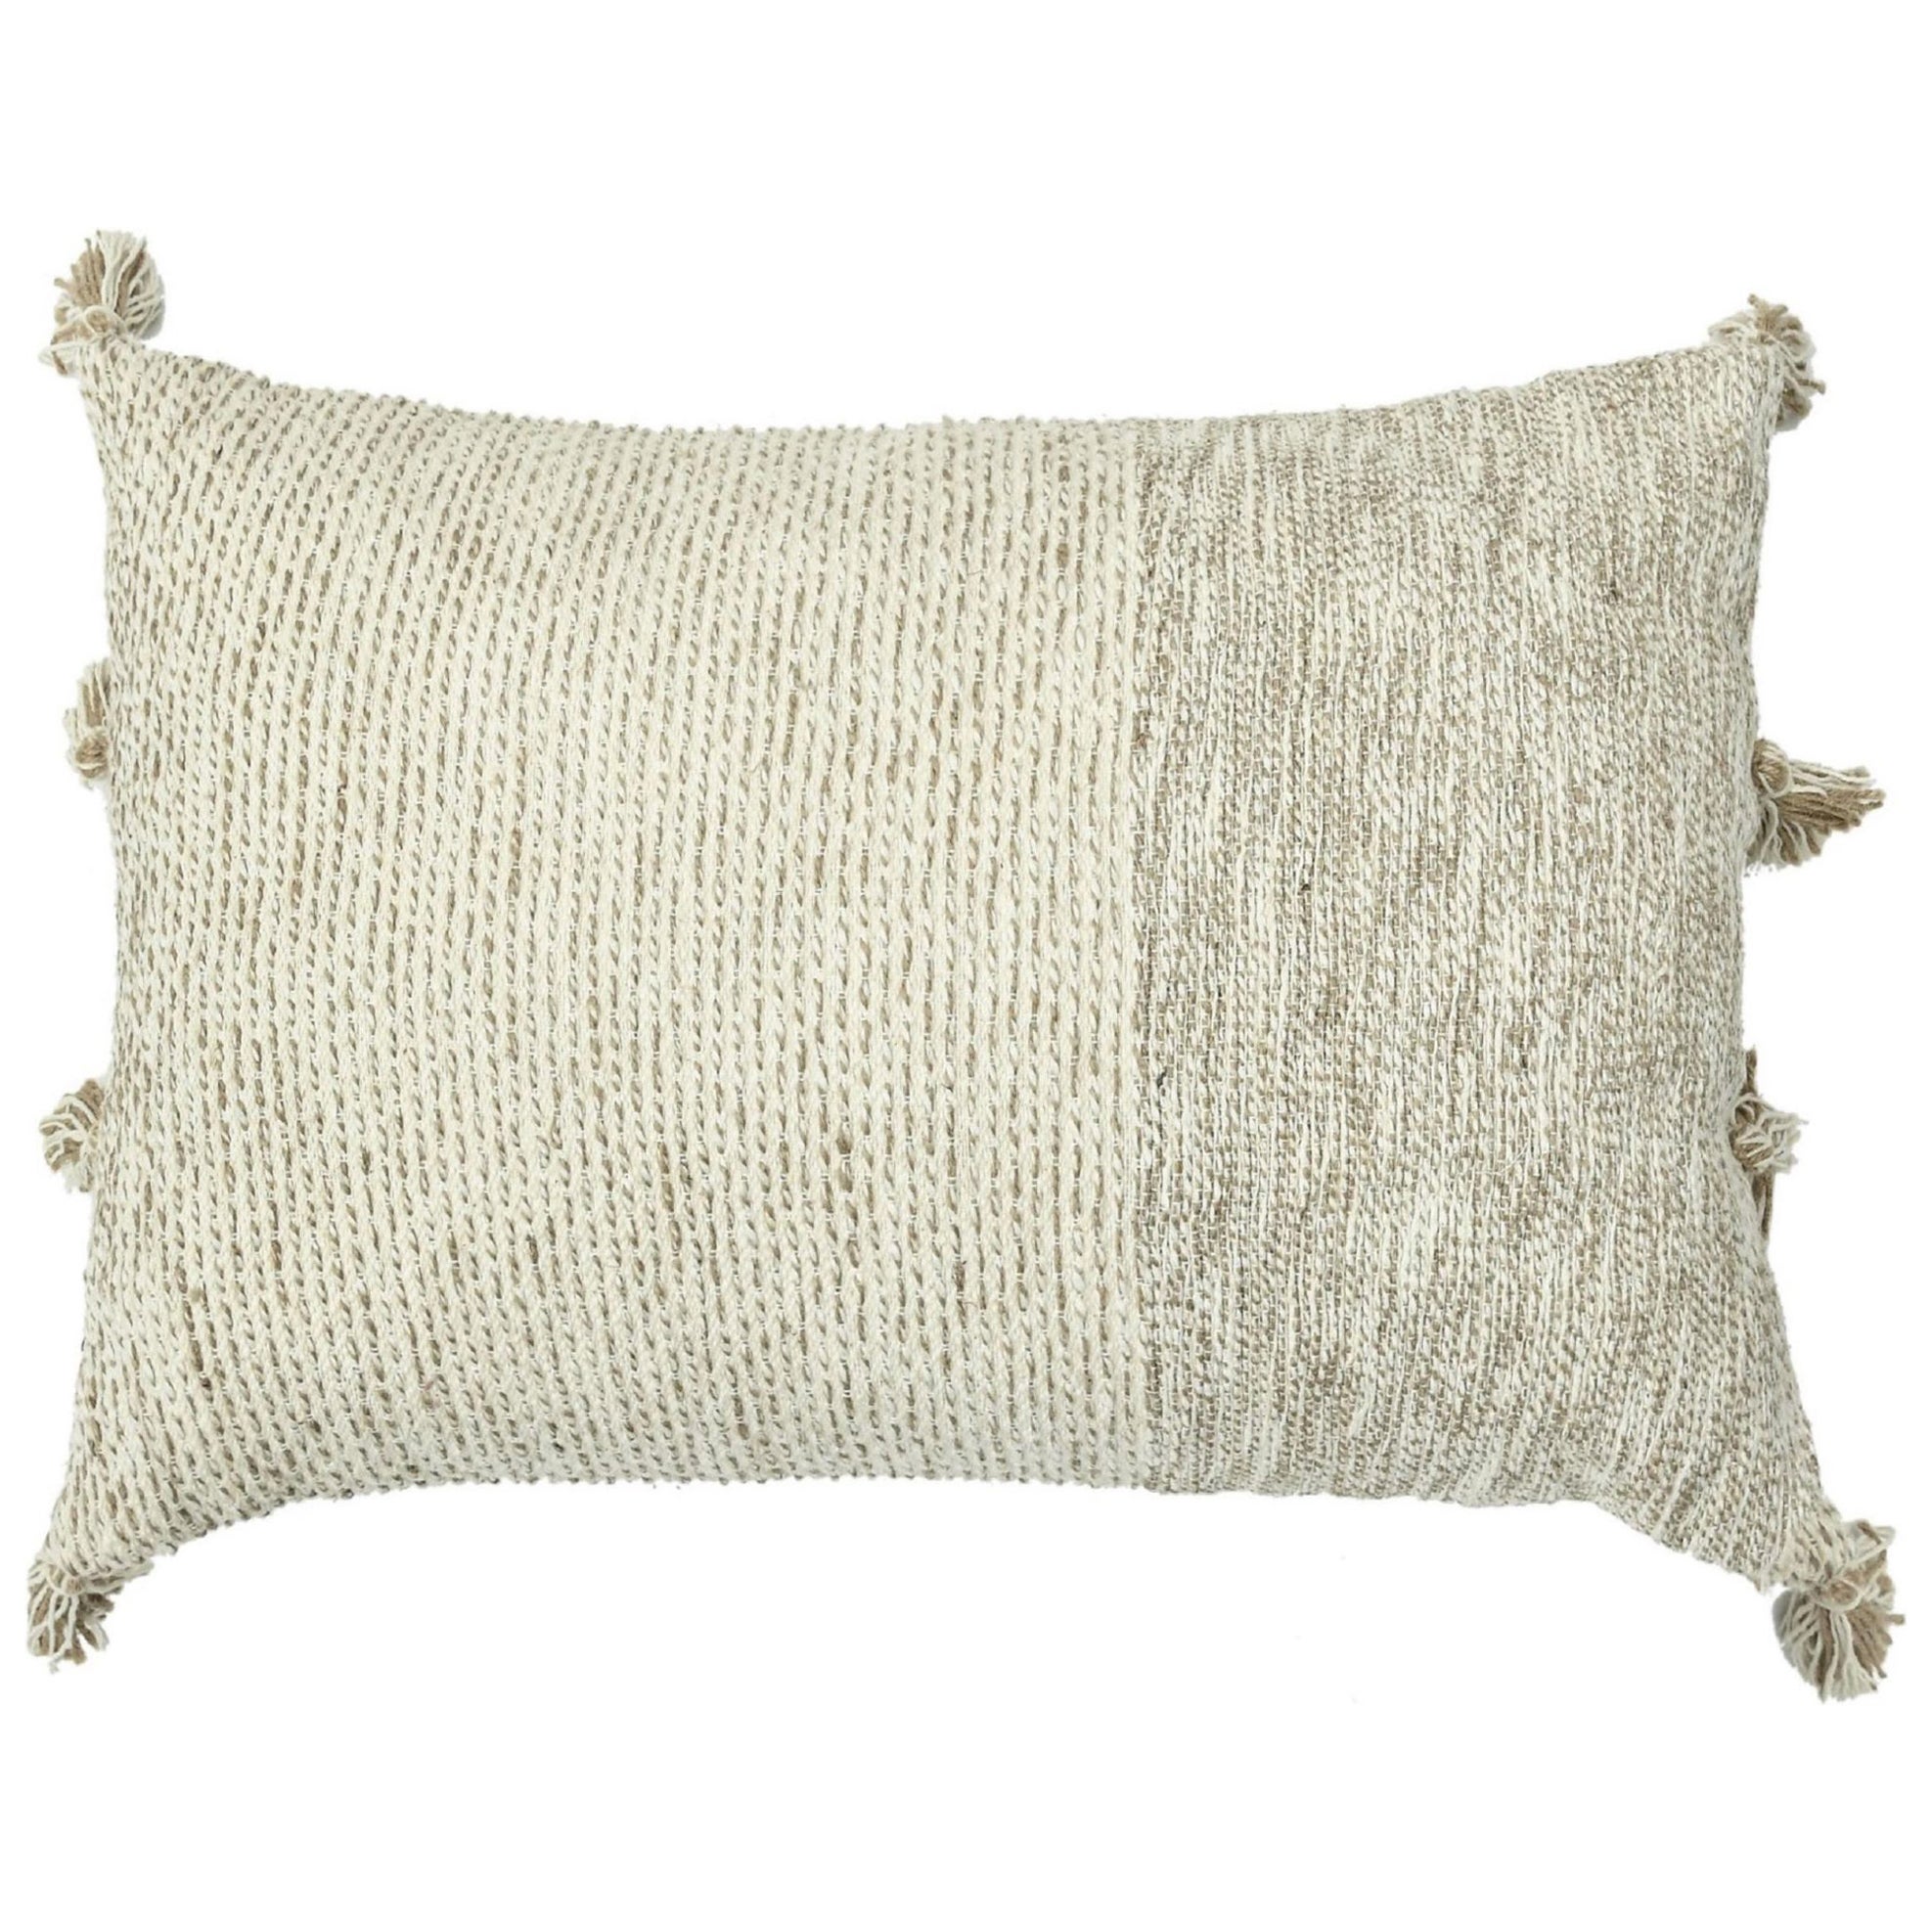 Boho Chic Style Contemporary Wool and Cotton Pillow In Beige